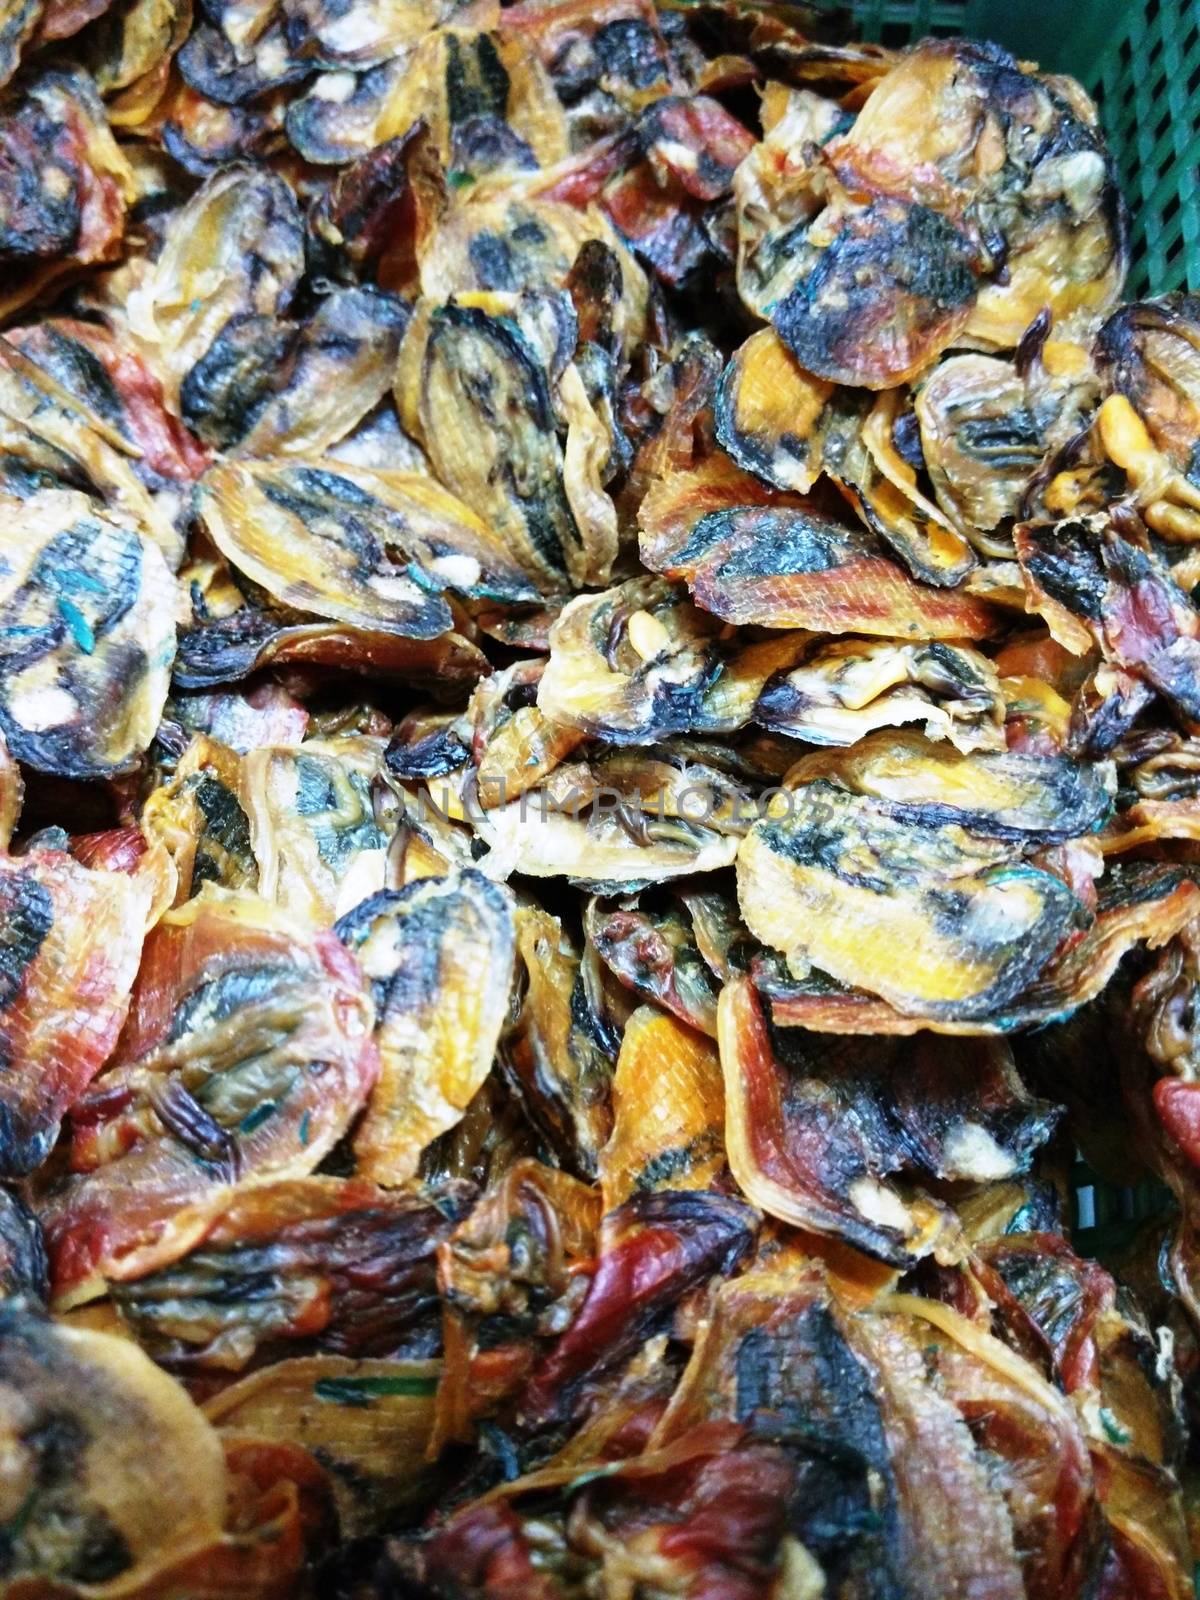 Dried Salted Shellfish selling in the Market